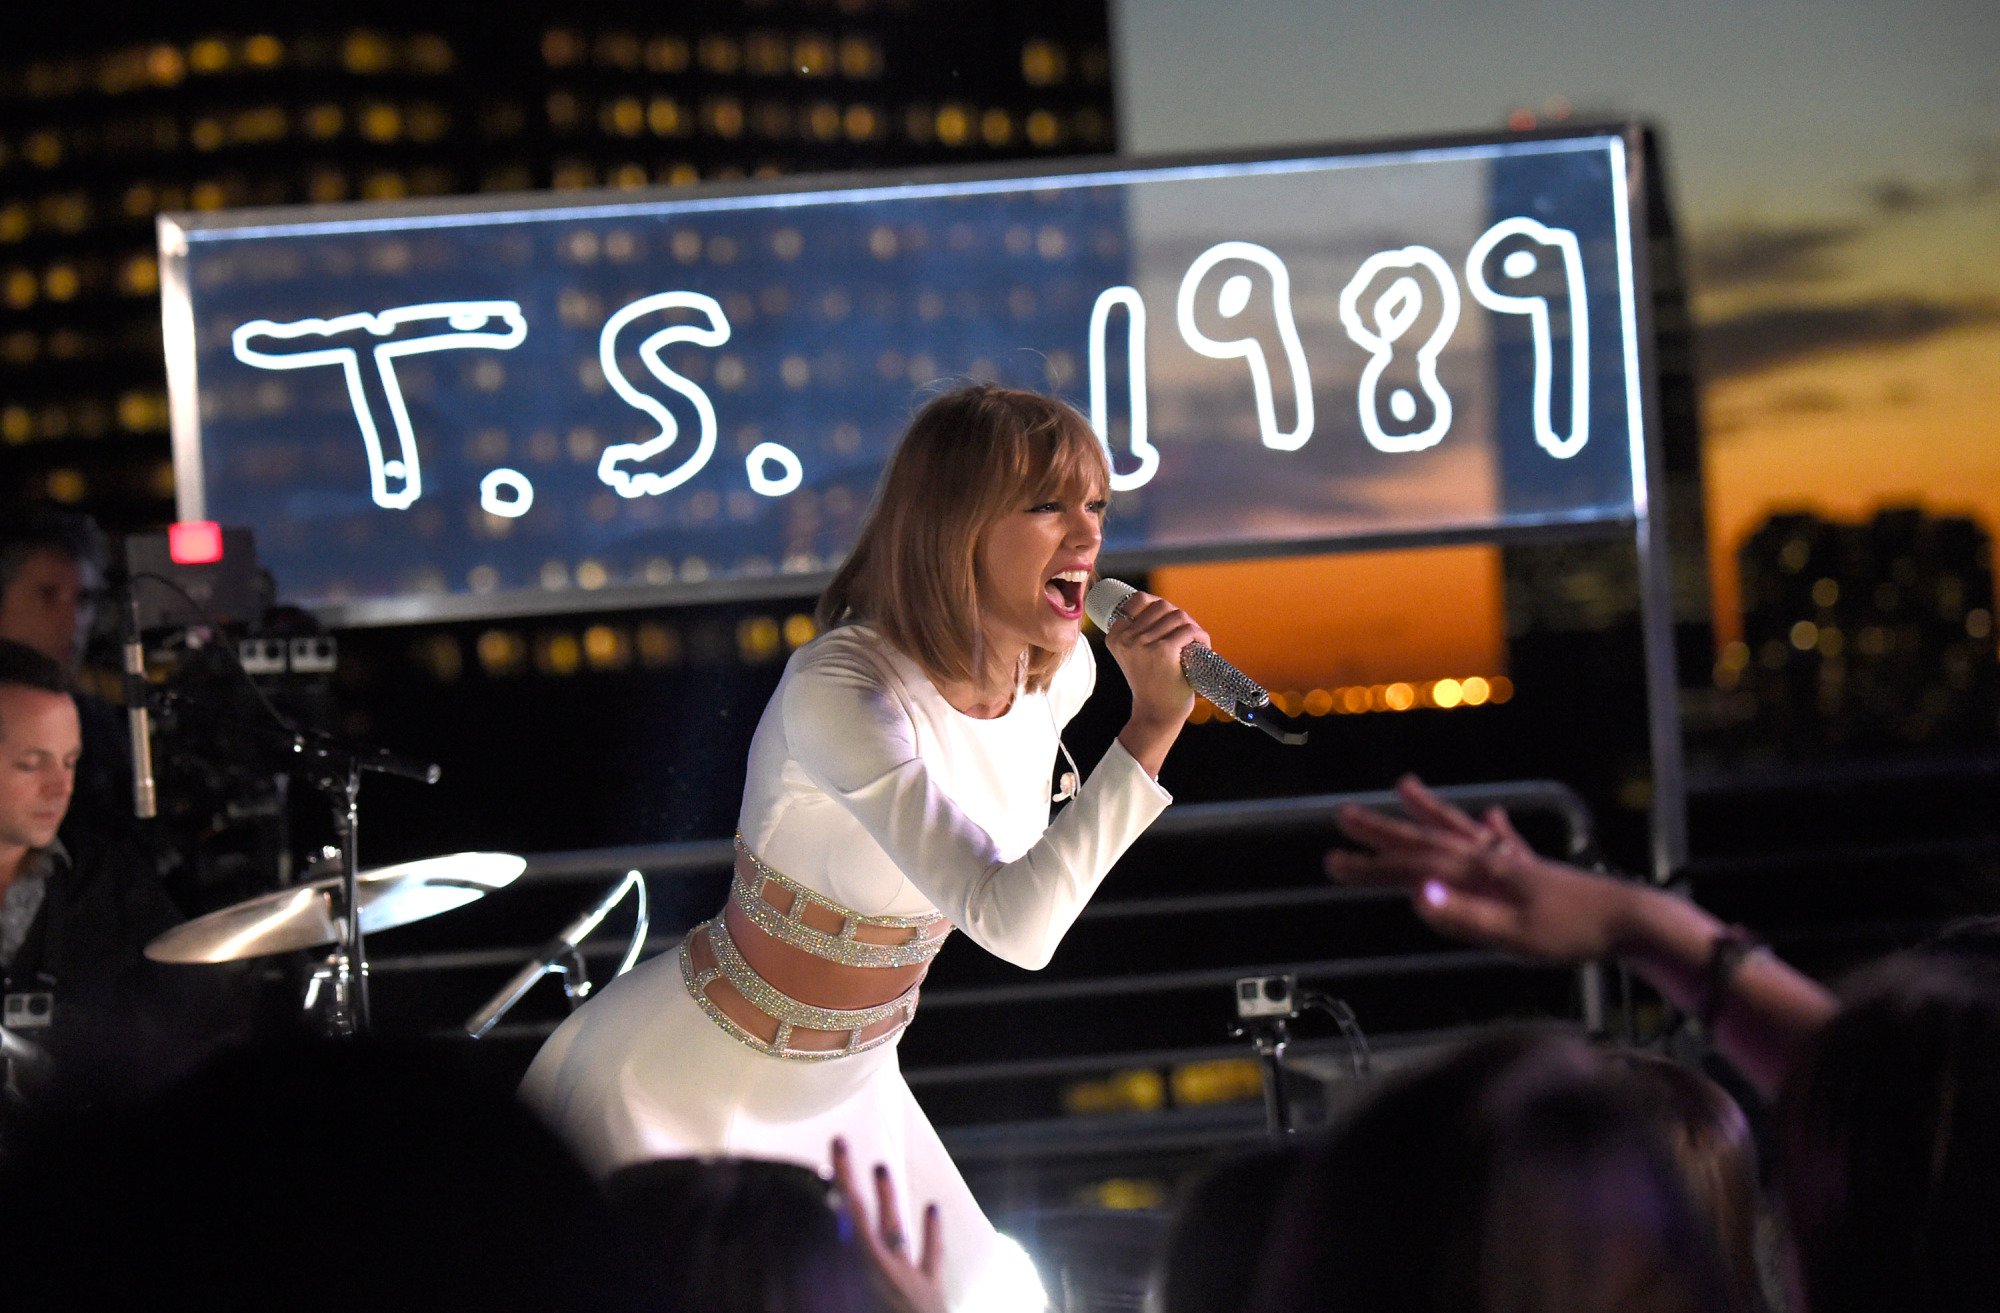 Taylor Swift performs during her 1989 Secret Session with iHeartRadio on October 27, 2014 in New York City. She is wearing white and a neon sign that says "T.S. 1989" glows behind her.